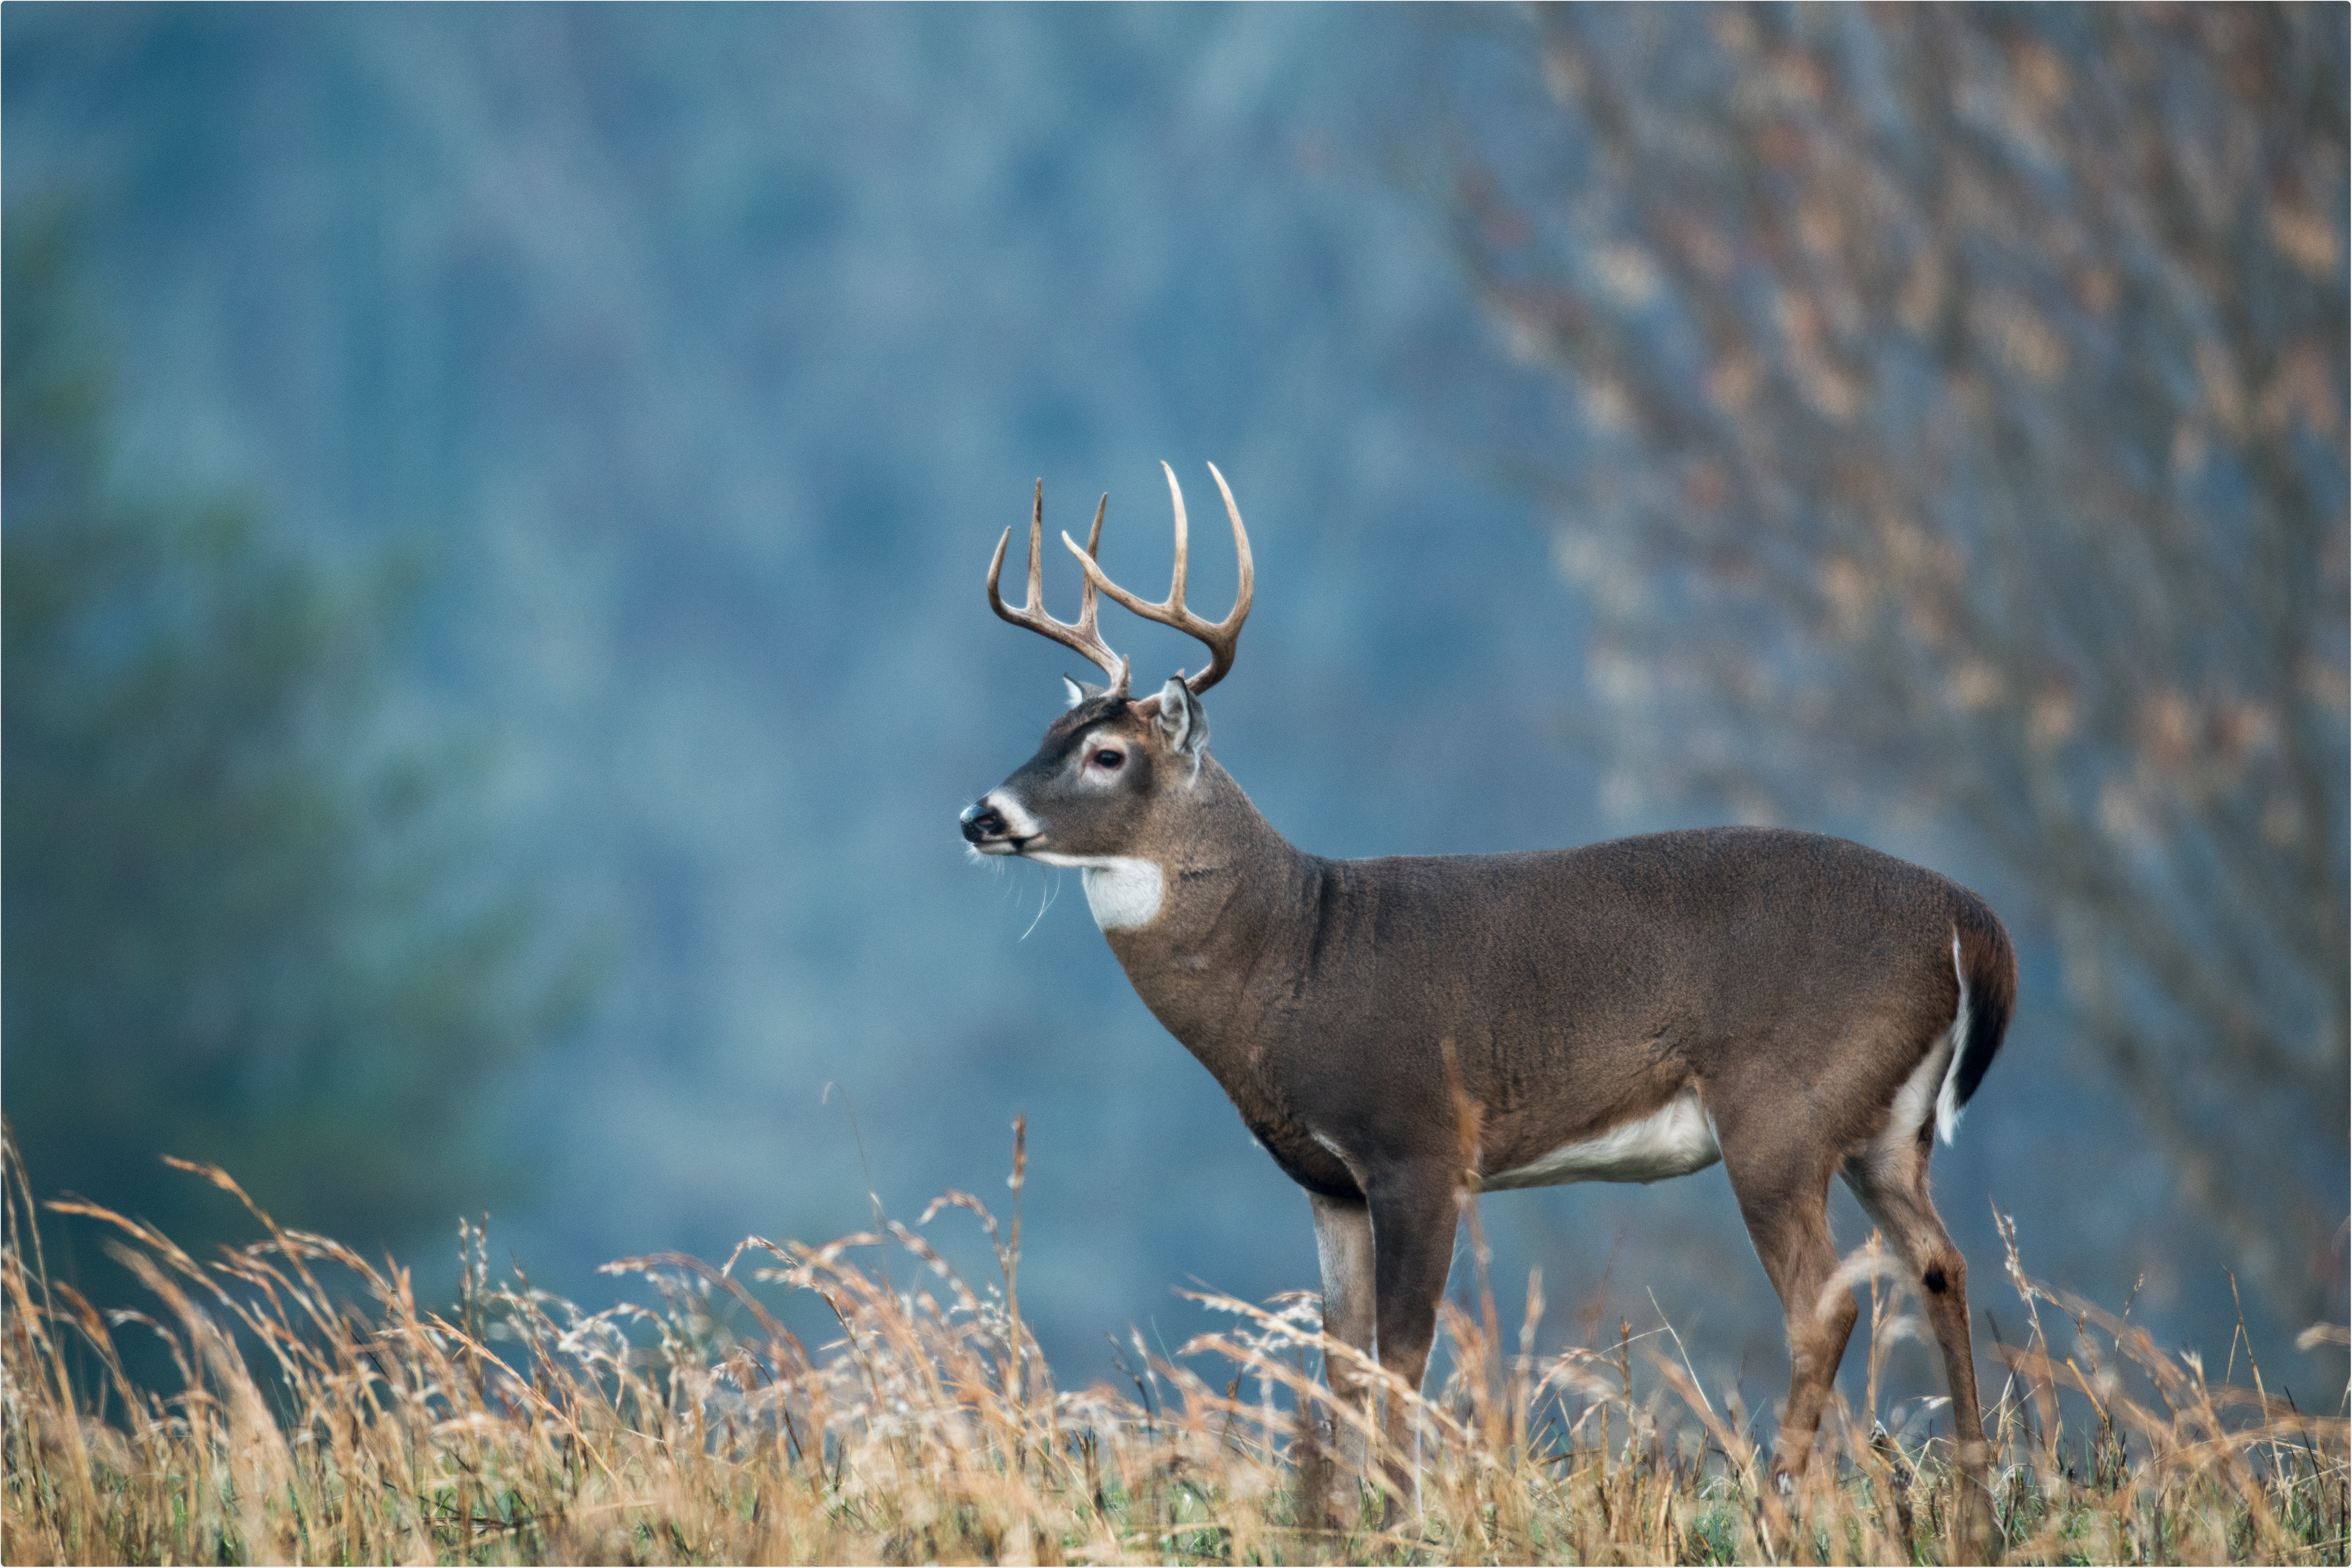 Study: SARS-CoV-2 exposure in wild white-tailed deer (Odocoileus virginianus). Image Credit: Tony Campbell / Shutterstock